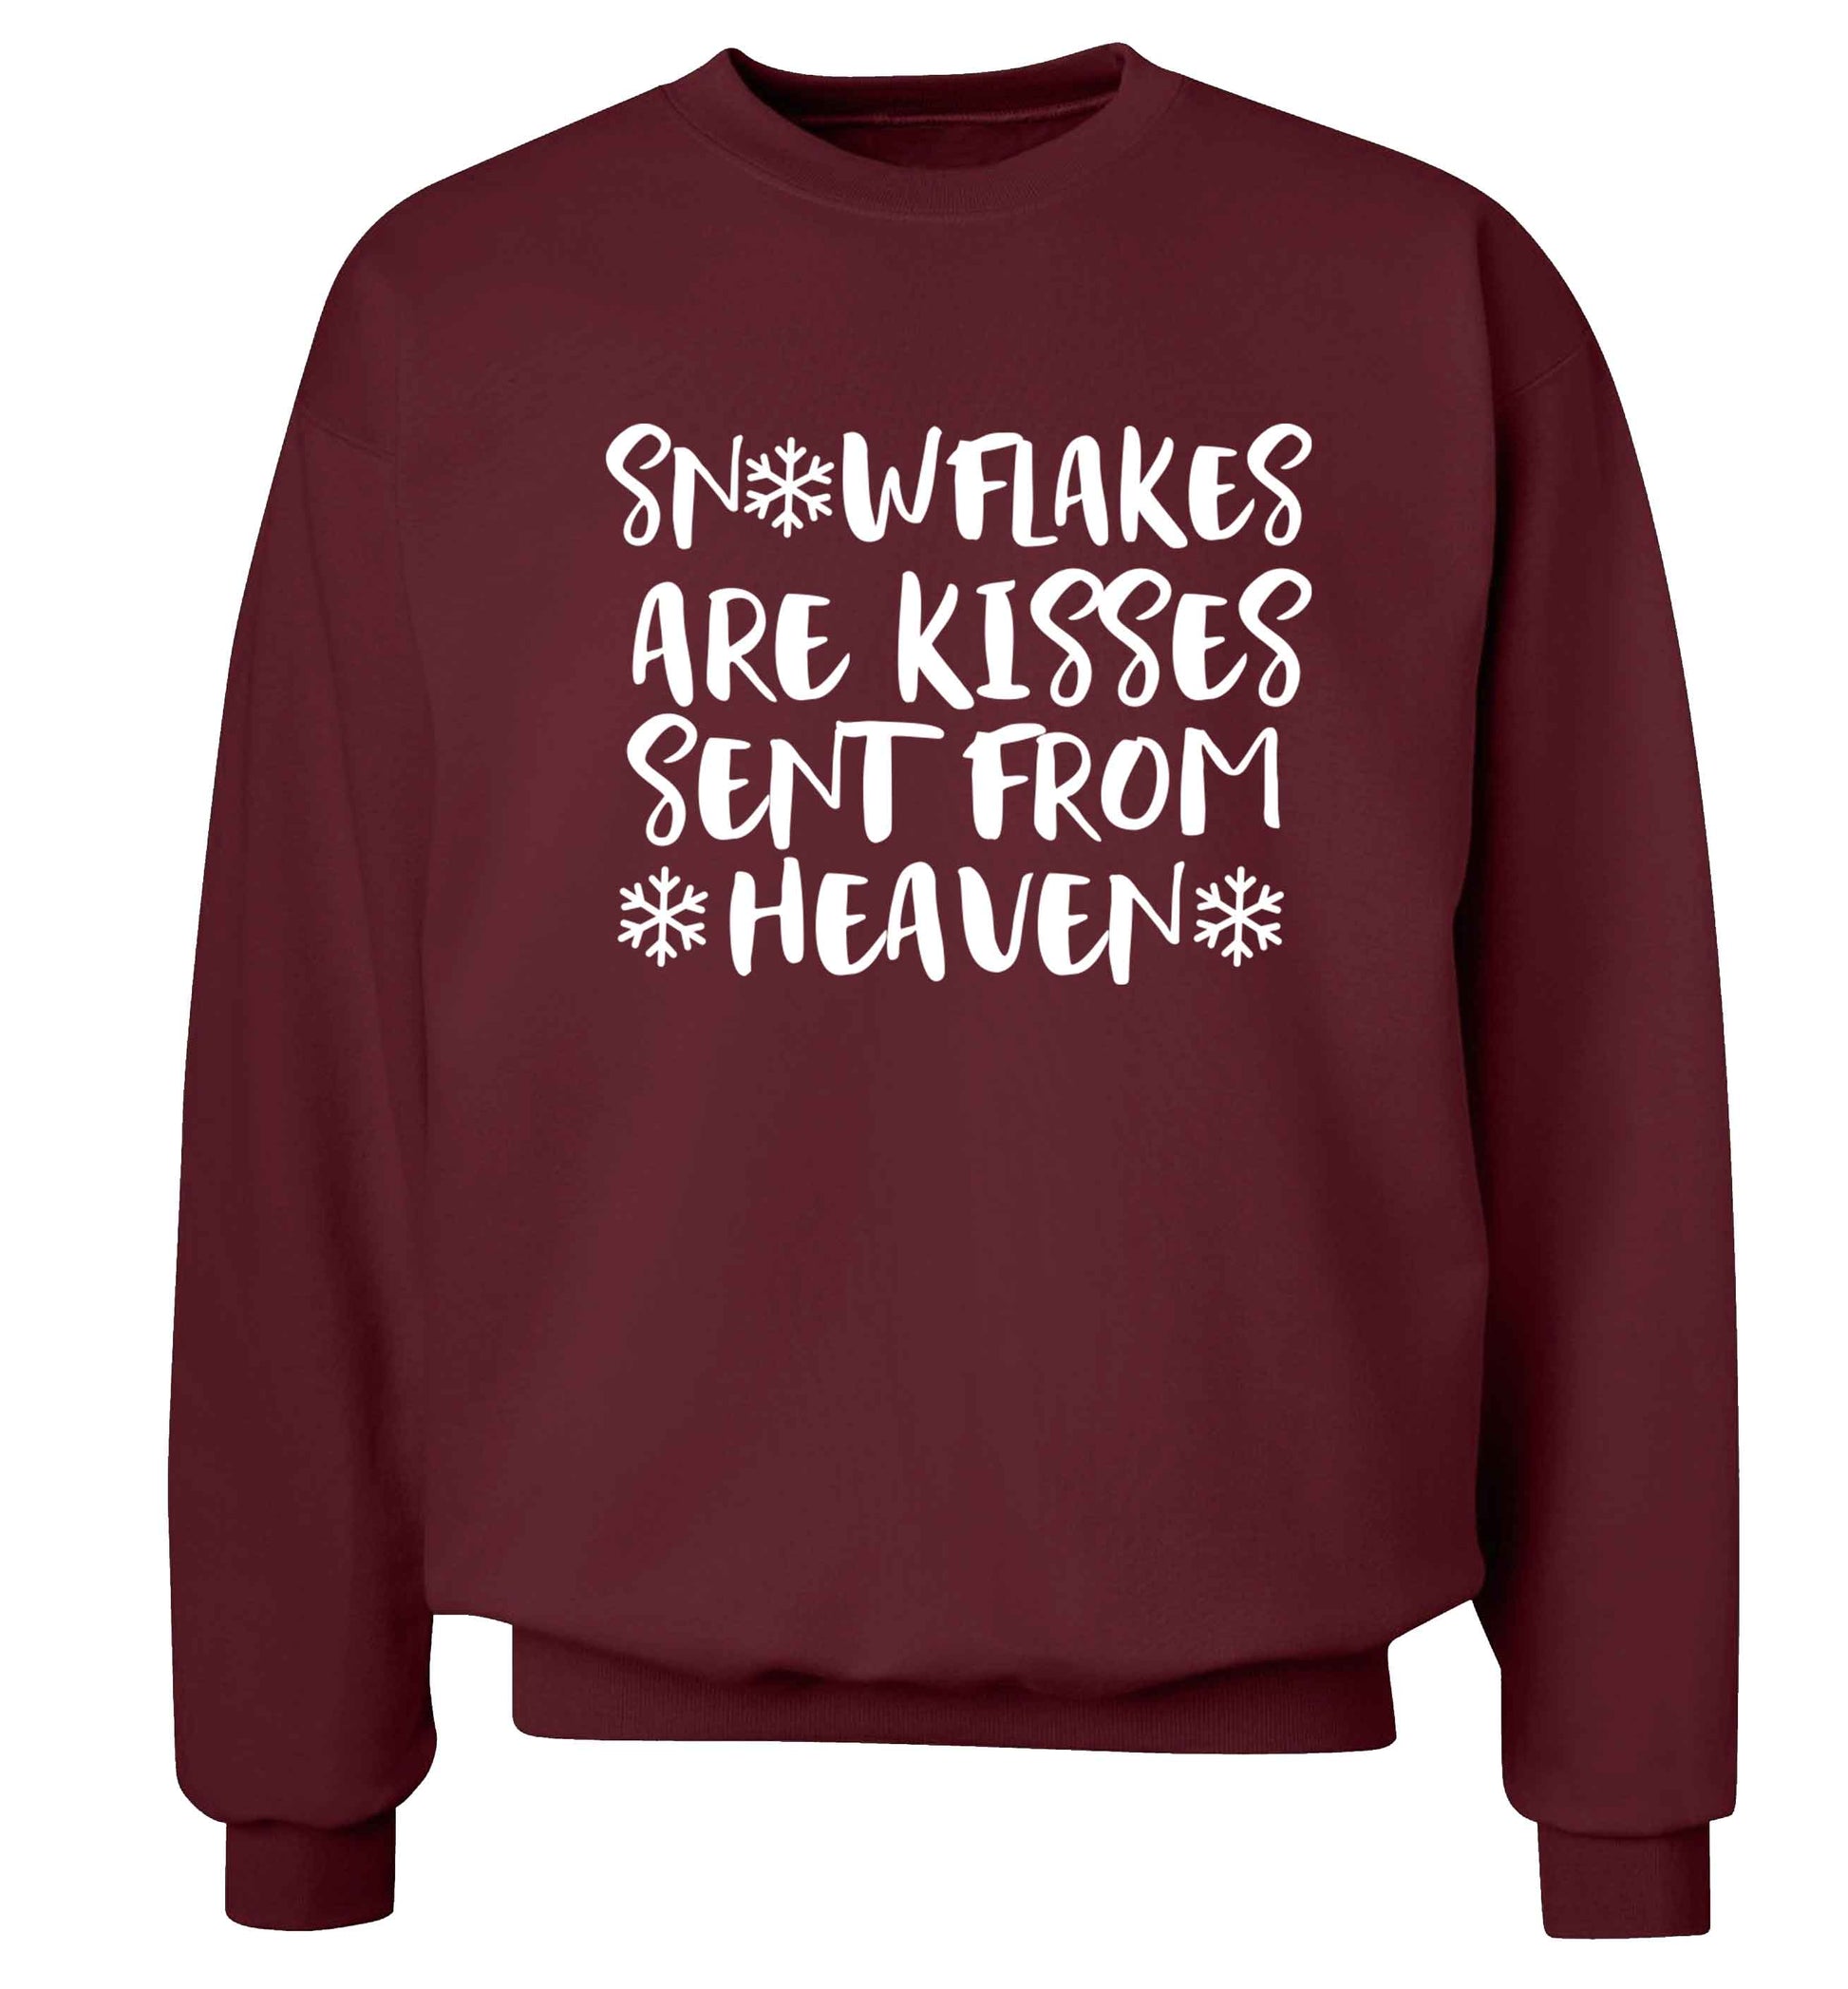 Snowflakes are kisses sent from heaven Adult's unisex maroon Sweater 2XL